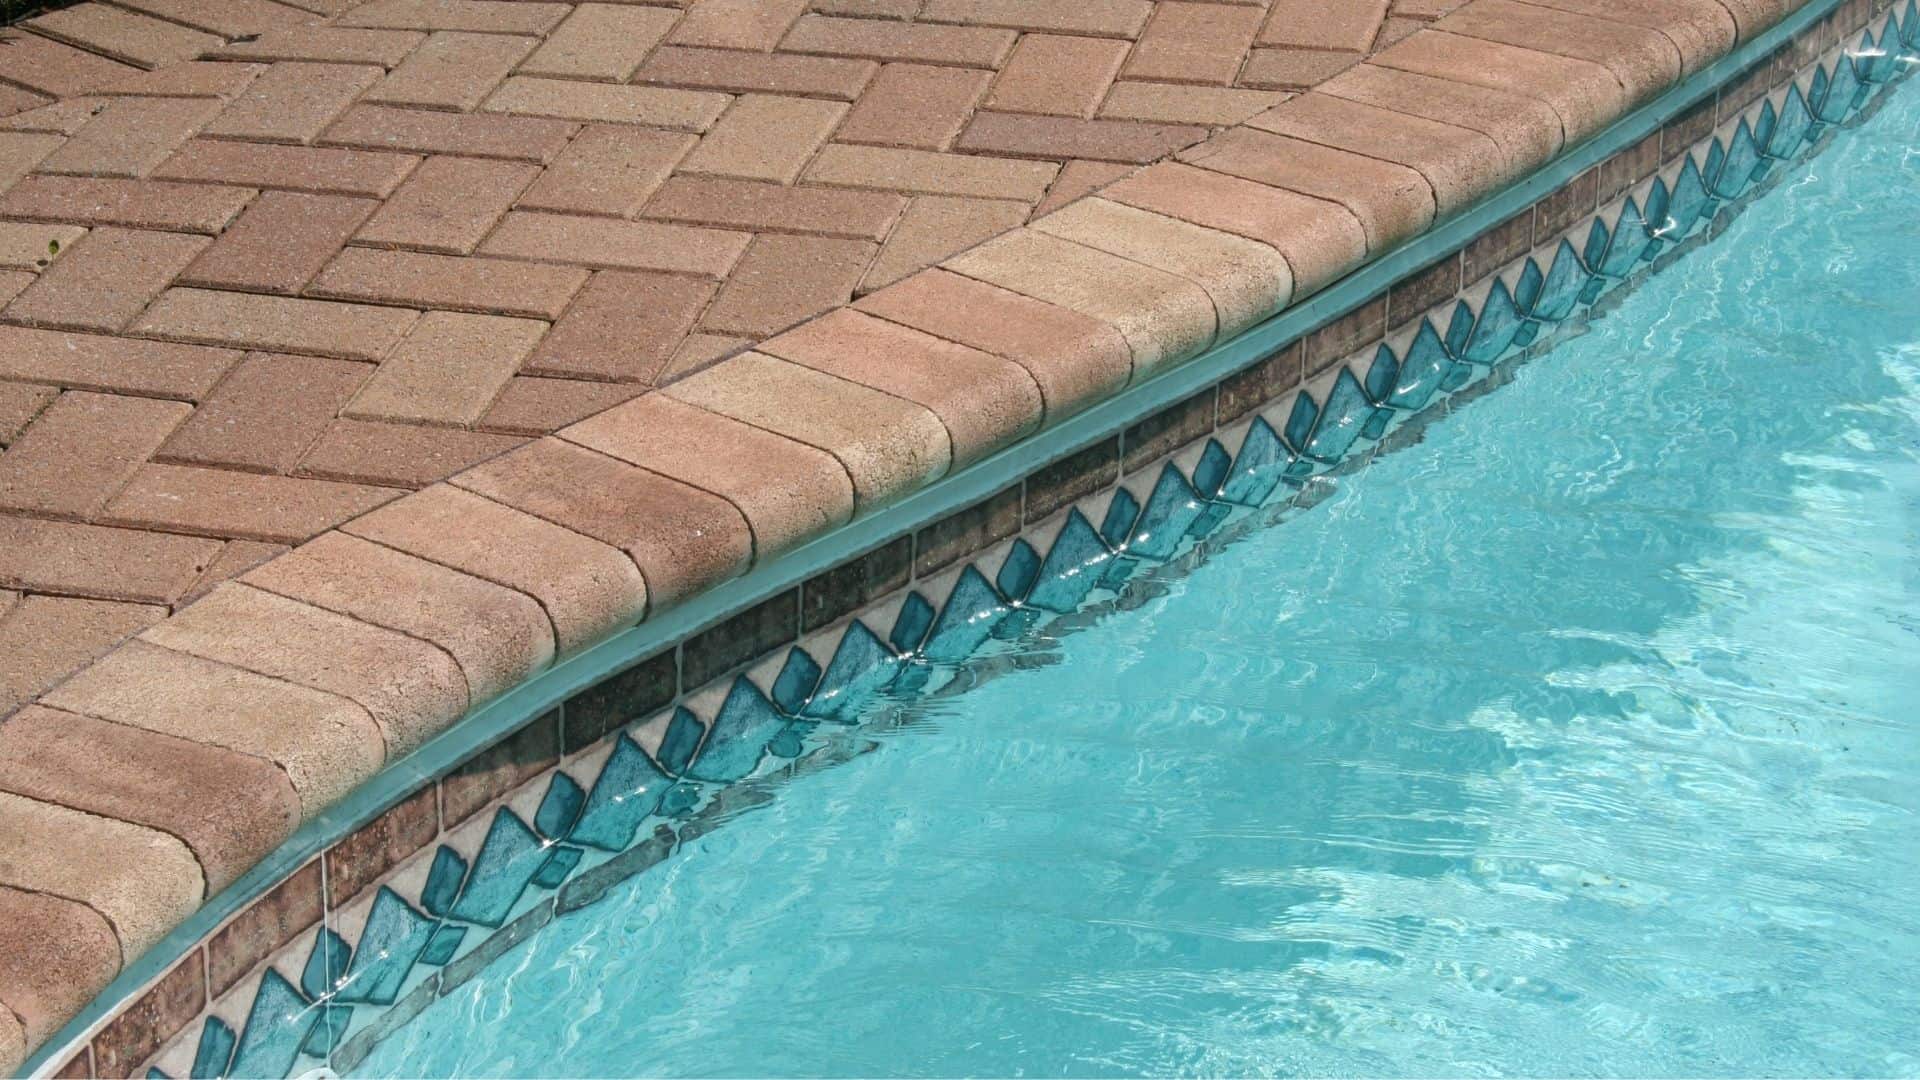 Pool Coping: What Is It and Why a Pool Needs It?